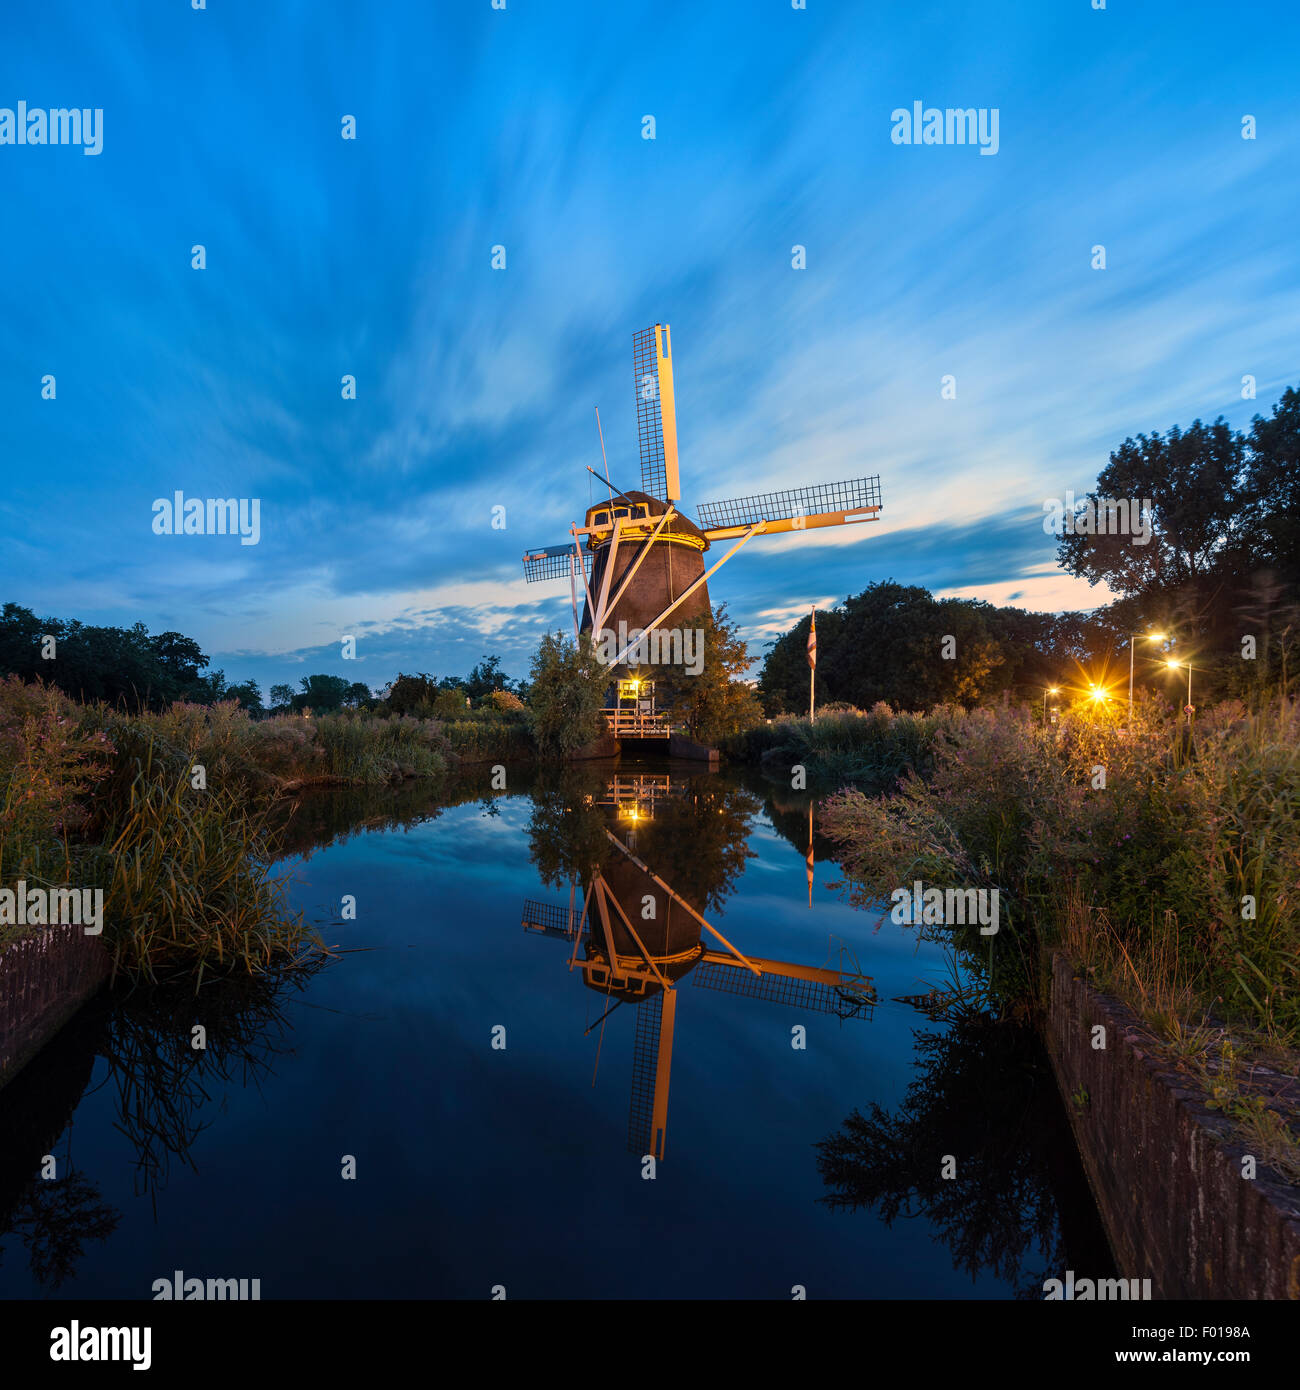 lejesoldat undskyldning Daggry Wim Wiskerke High Resolution Stock Photography and Images - Alamy